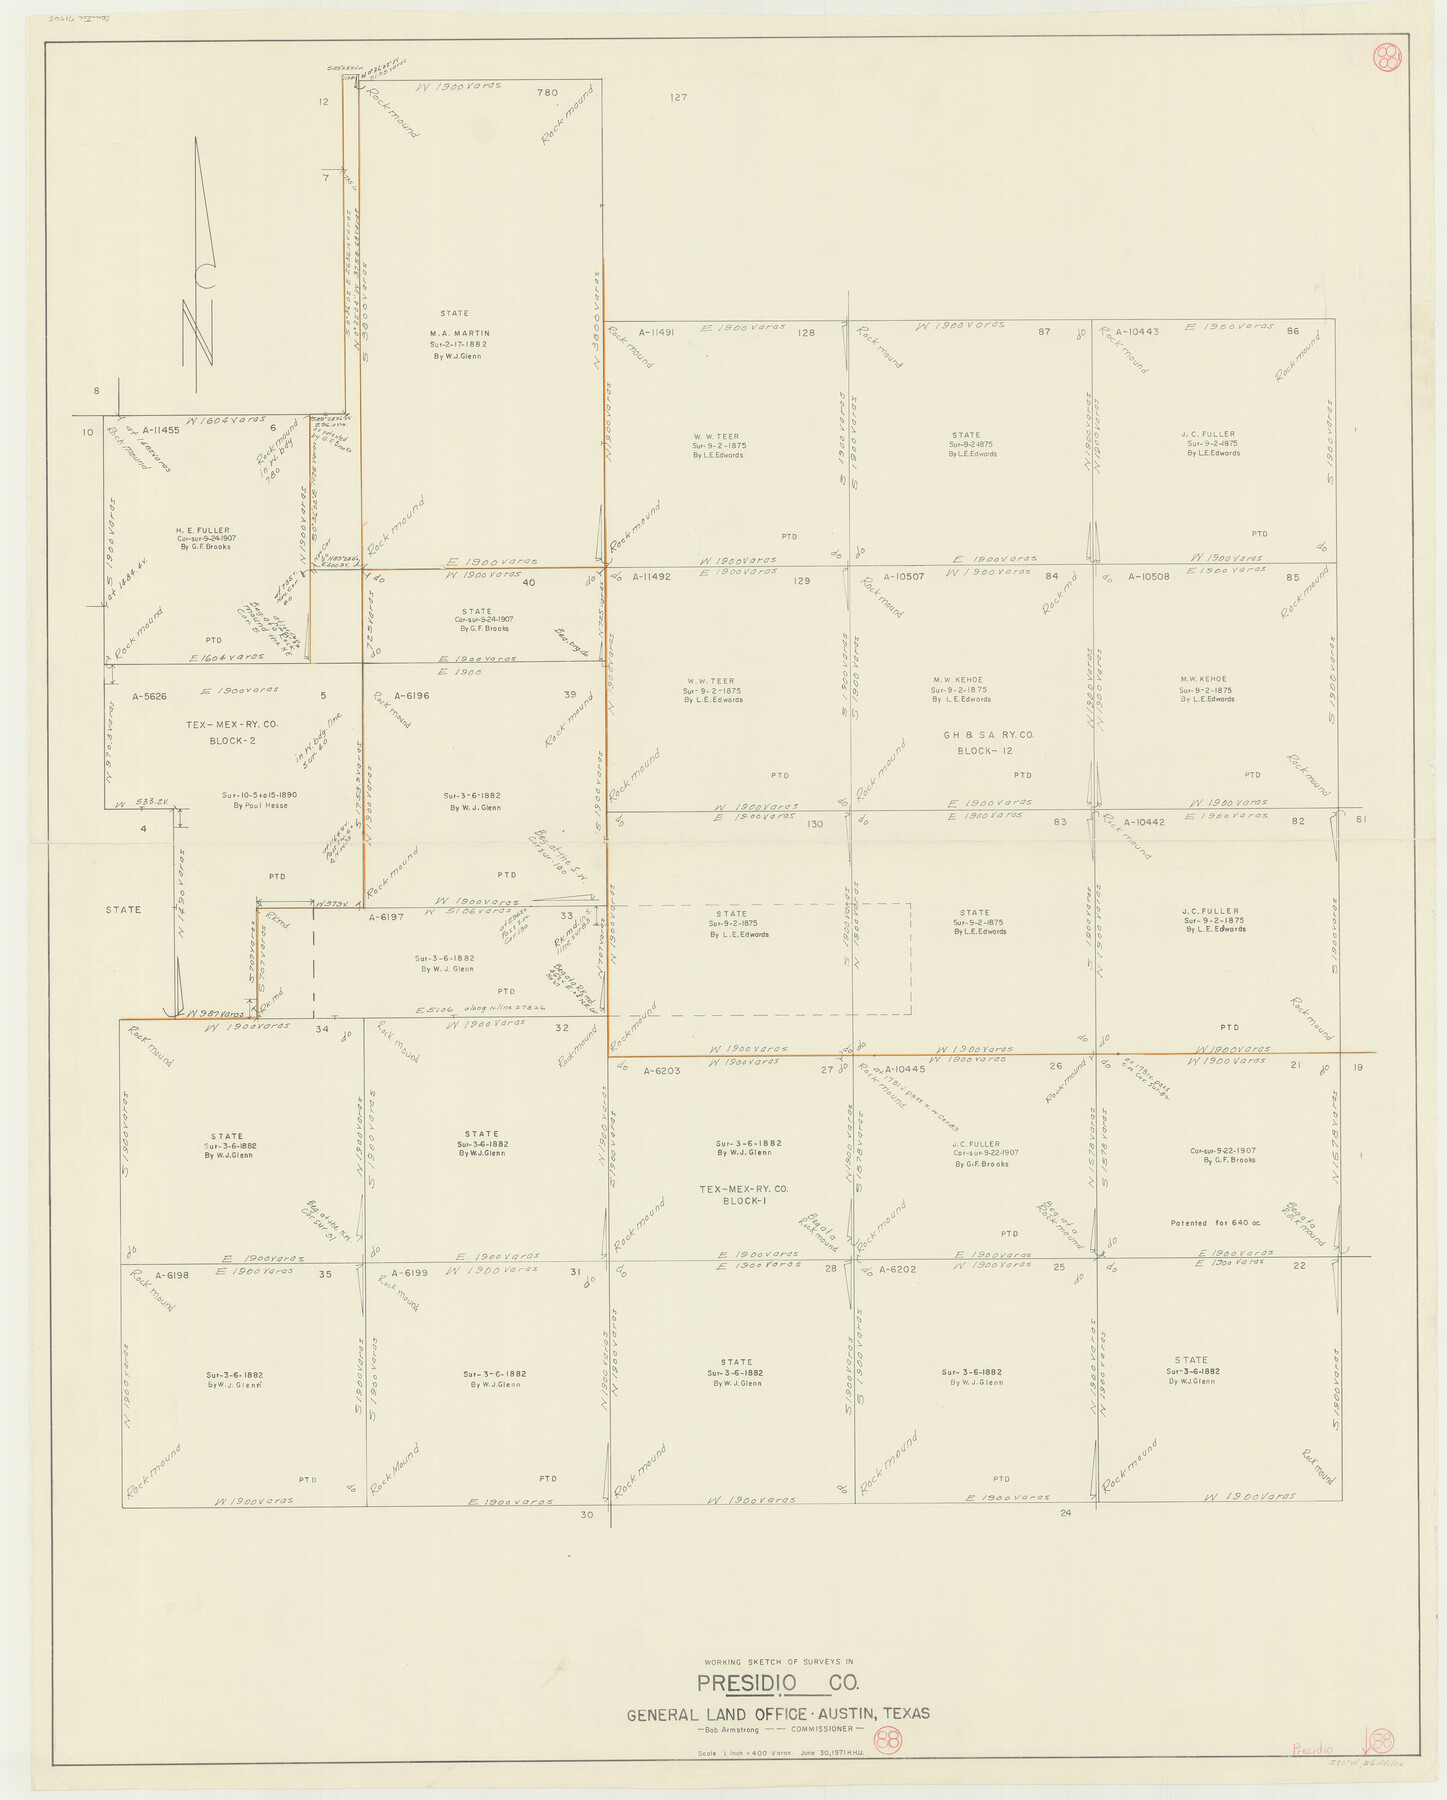 71765, Presidio County Working Sketch 88, General Map Collection